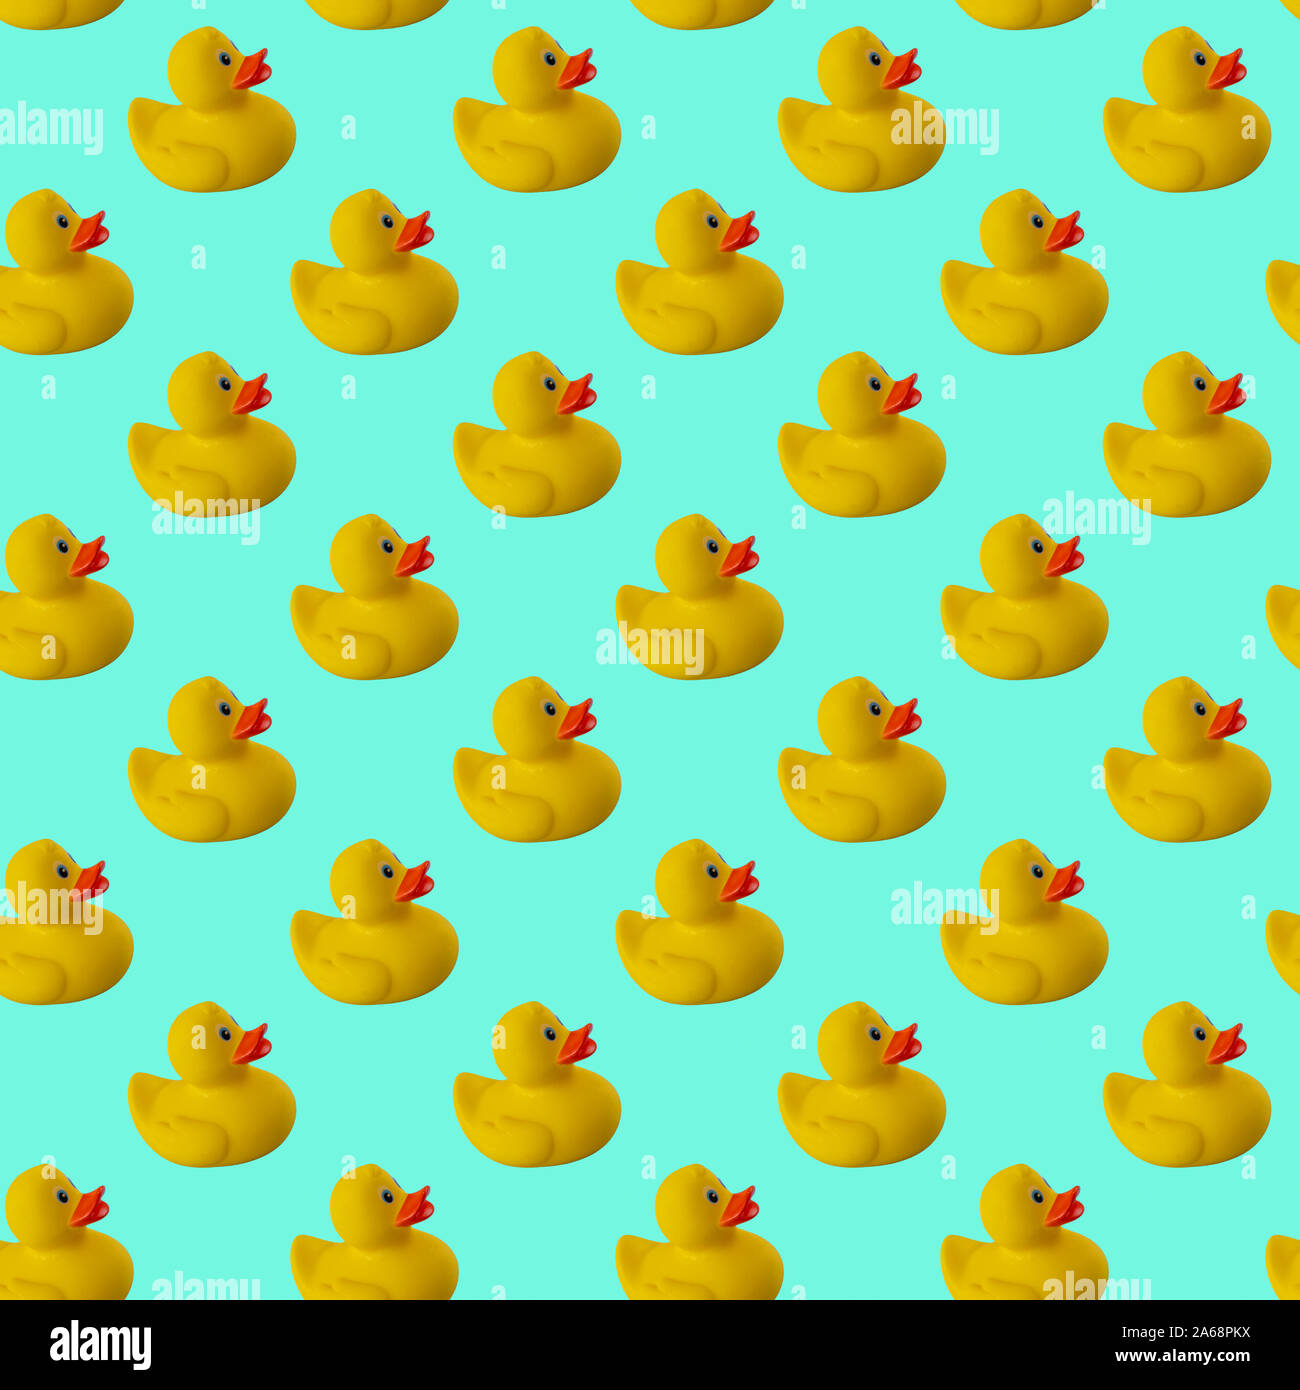 30k Rubber Duck Pictures  Download Free Images on Unsplash